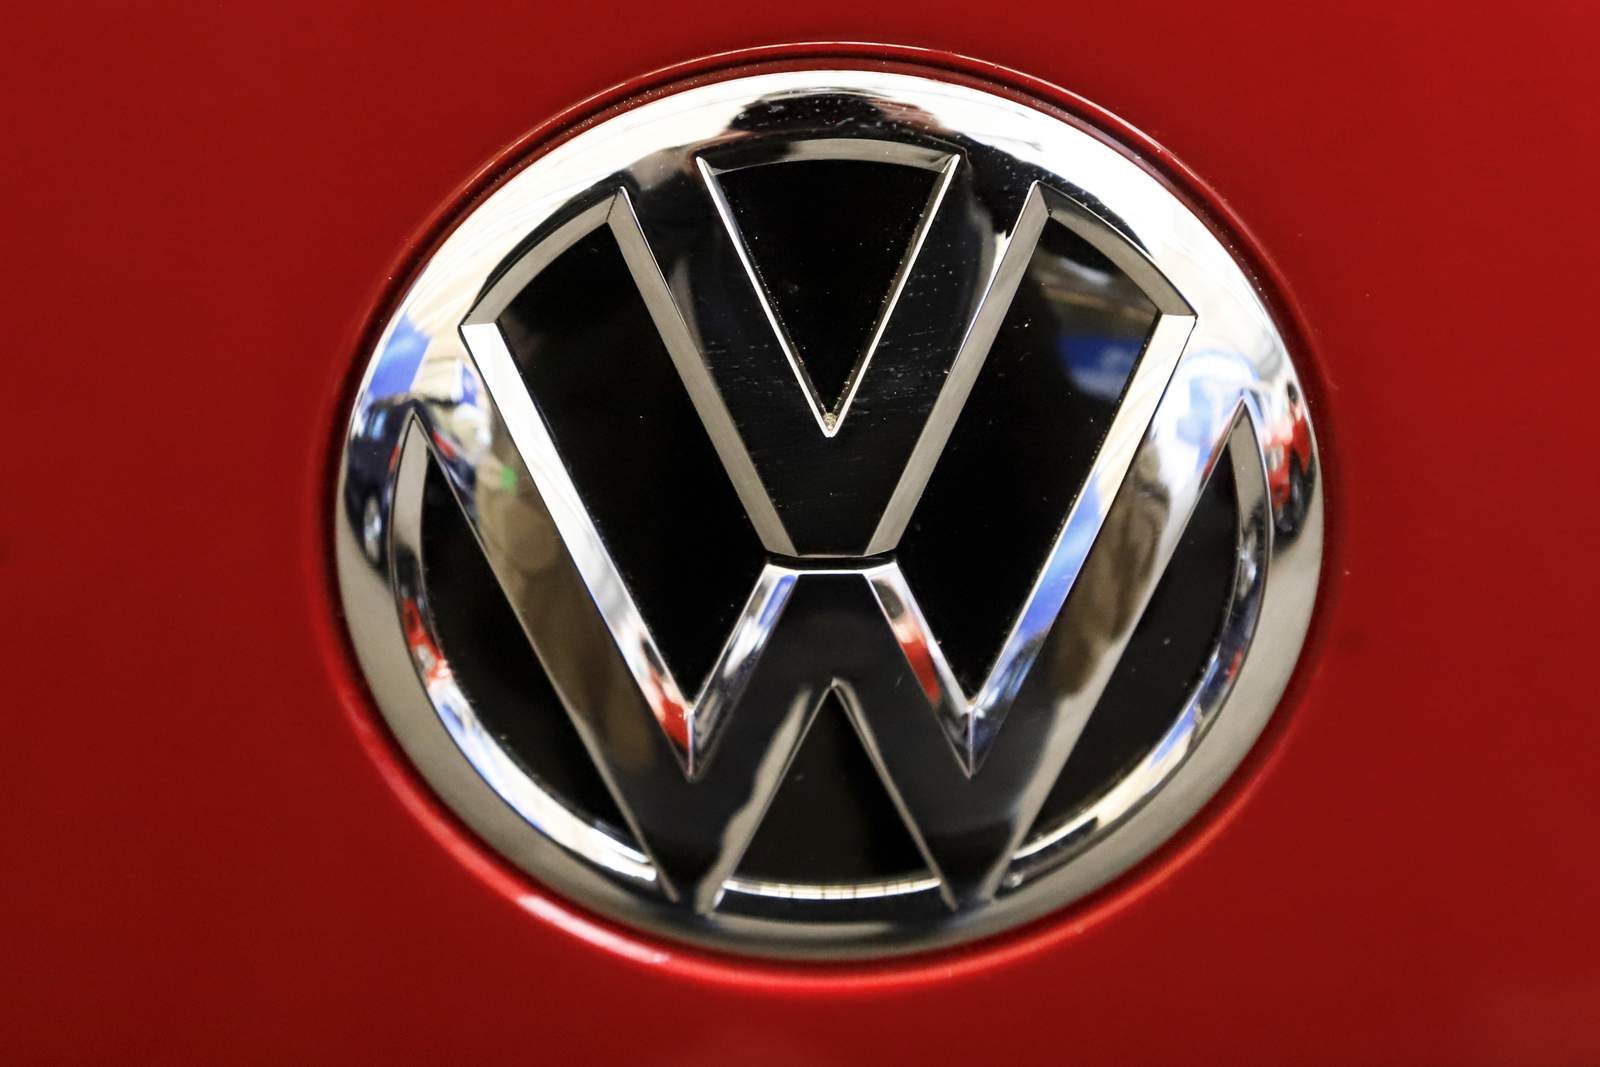 US agency opens 2 safety probes of Volkswagen, Audi vehicles